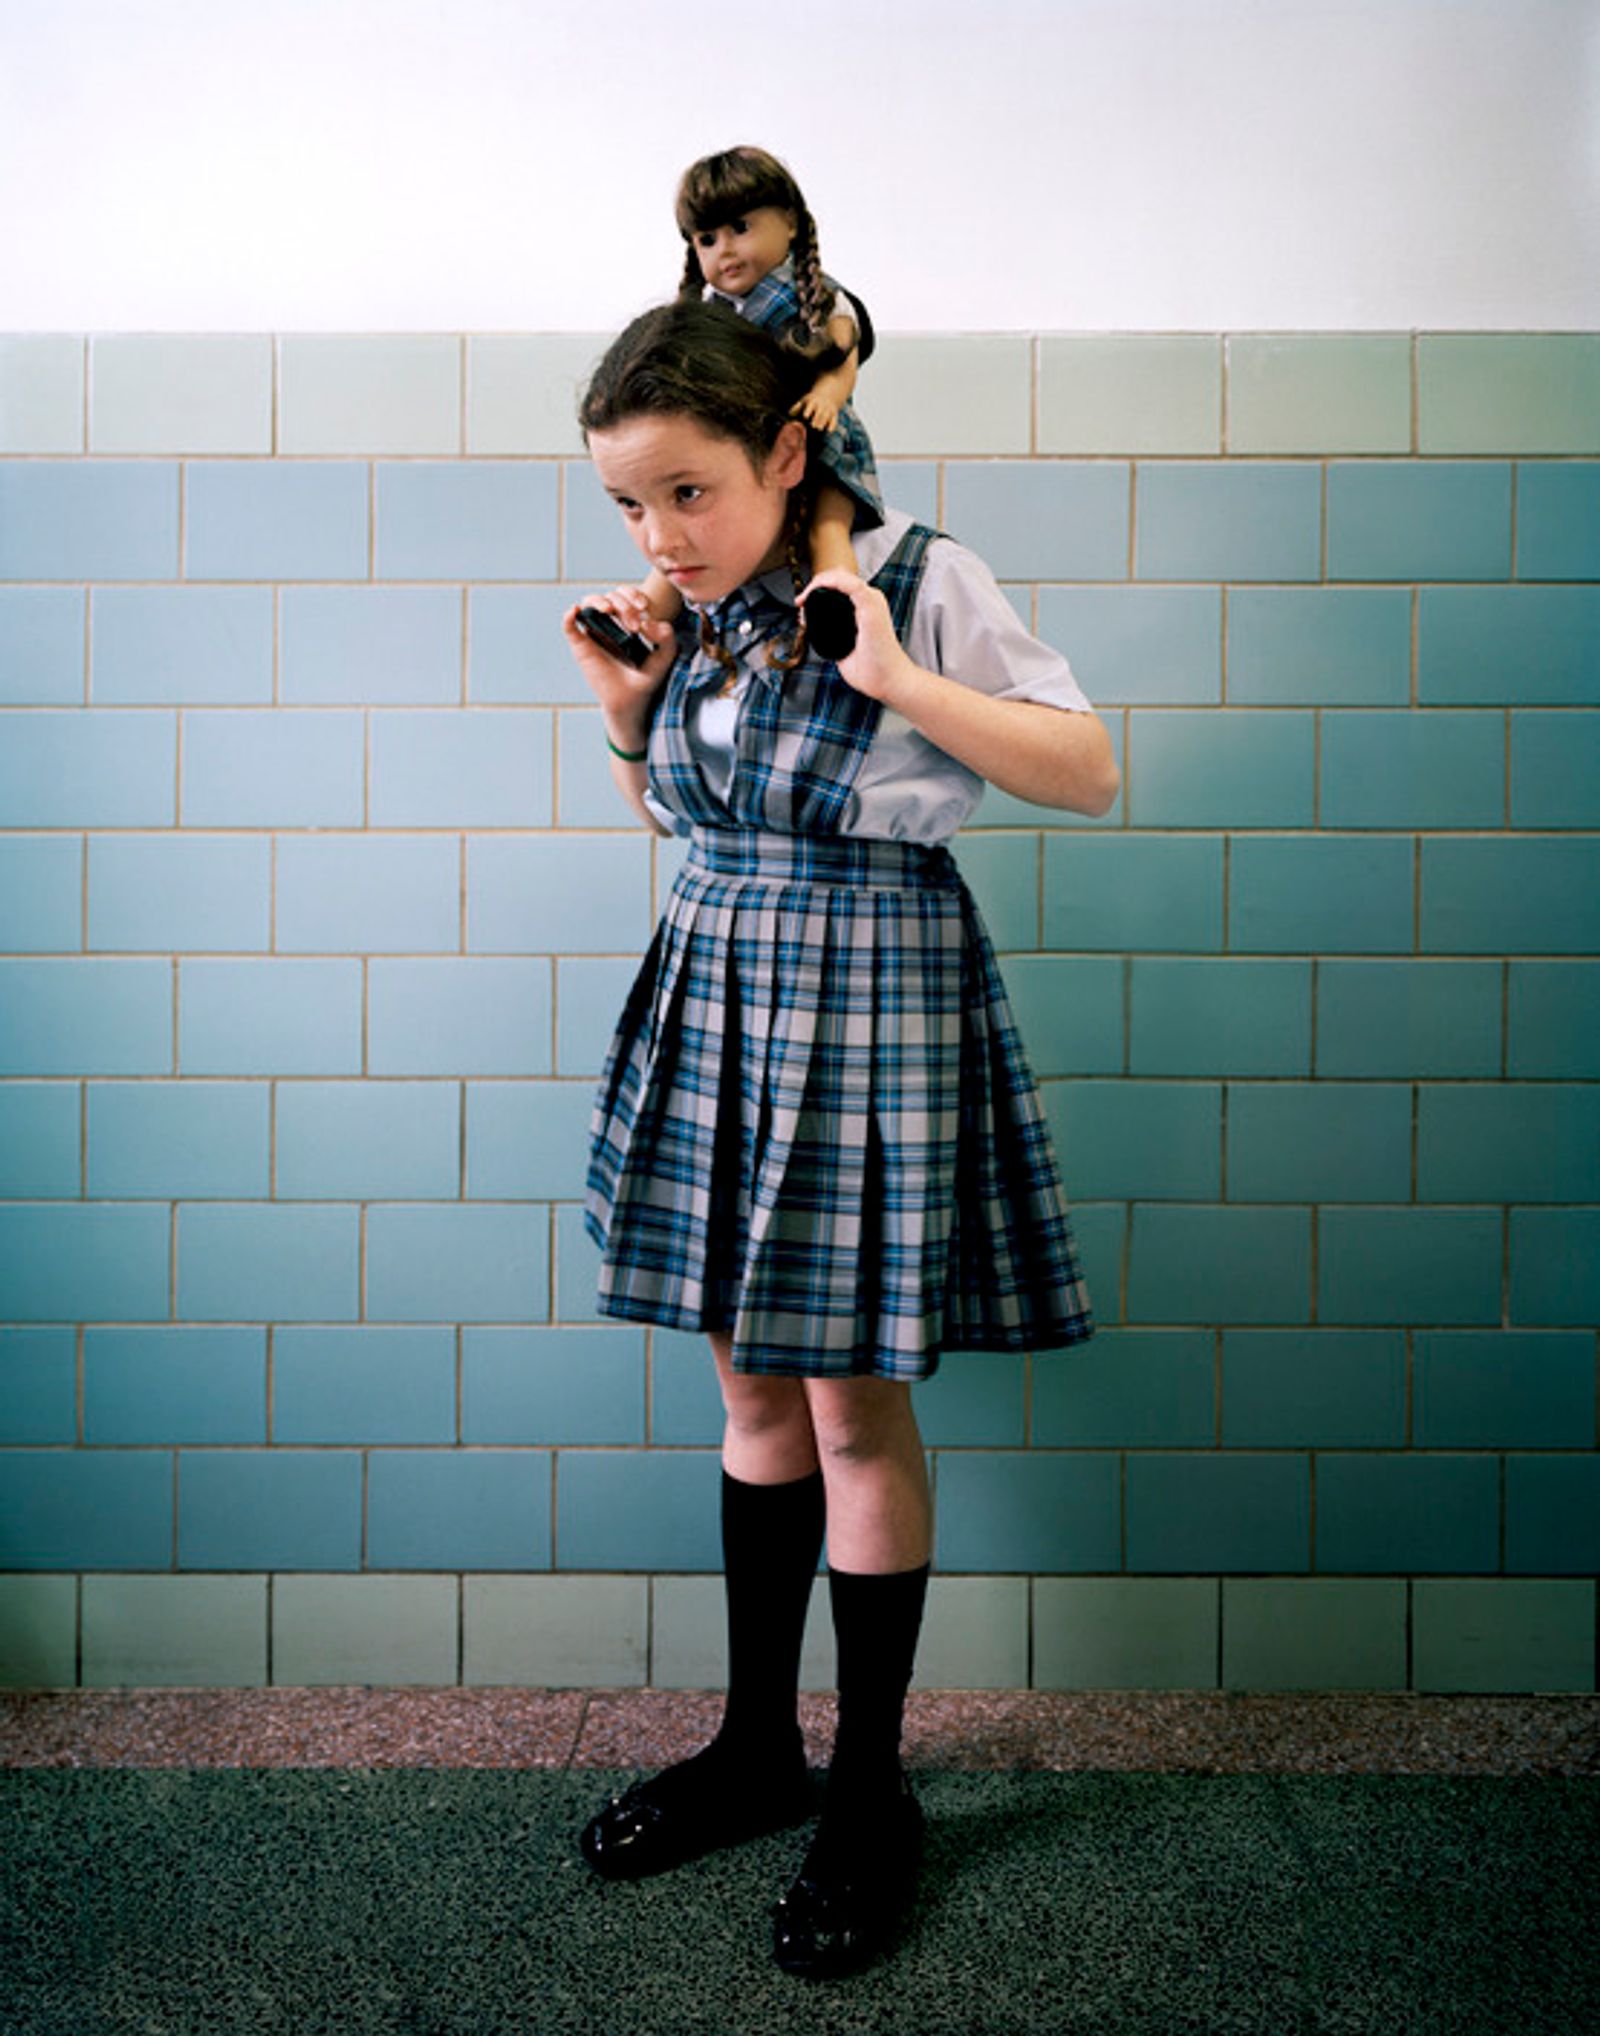 © Ilona Szwarc - Image from the American Girls photography project